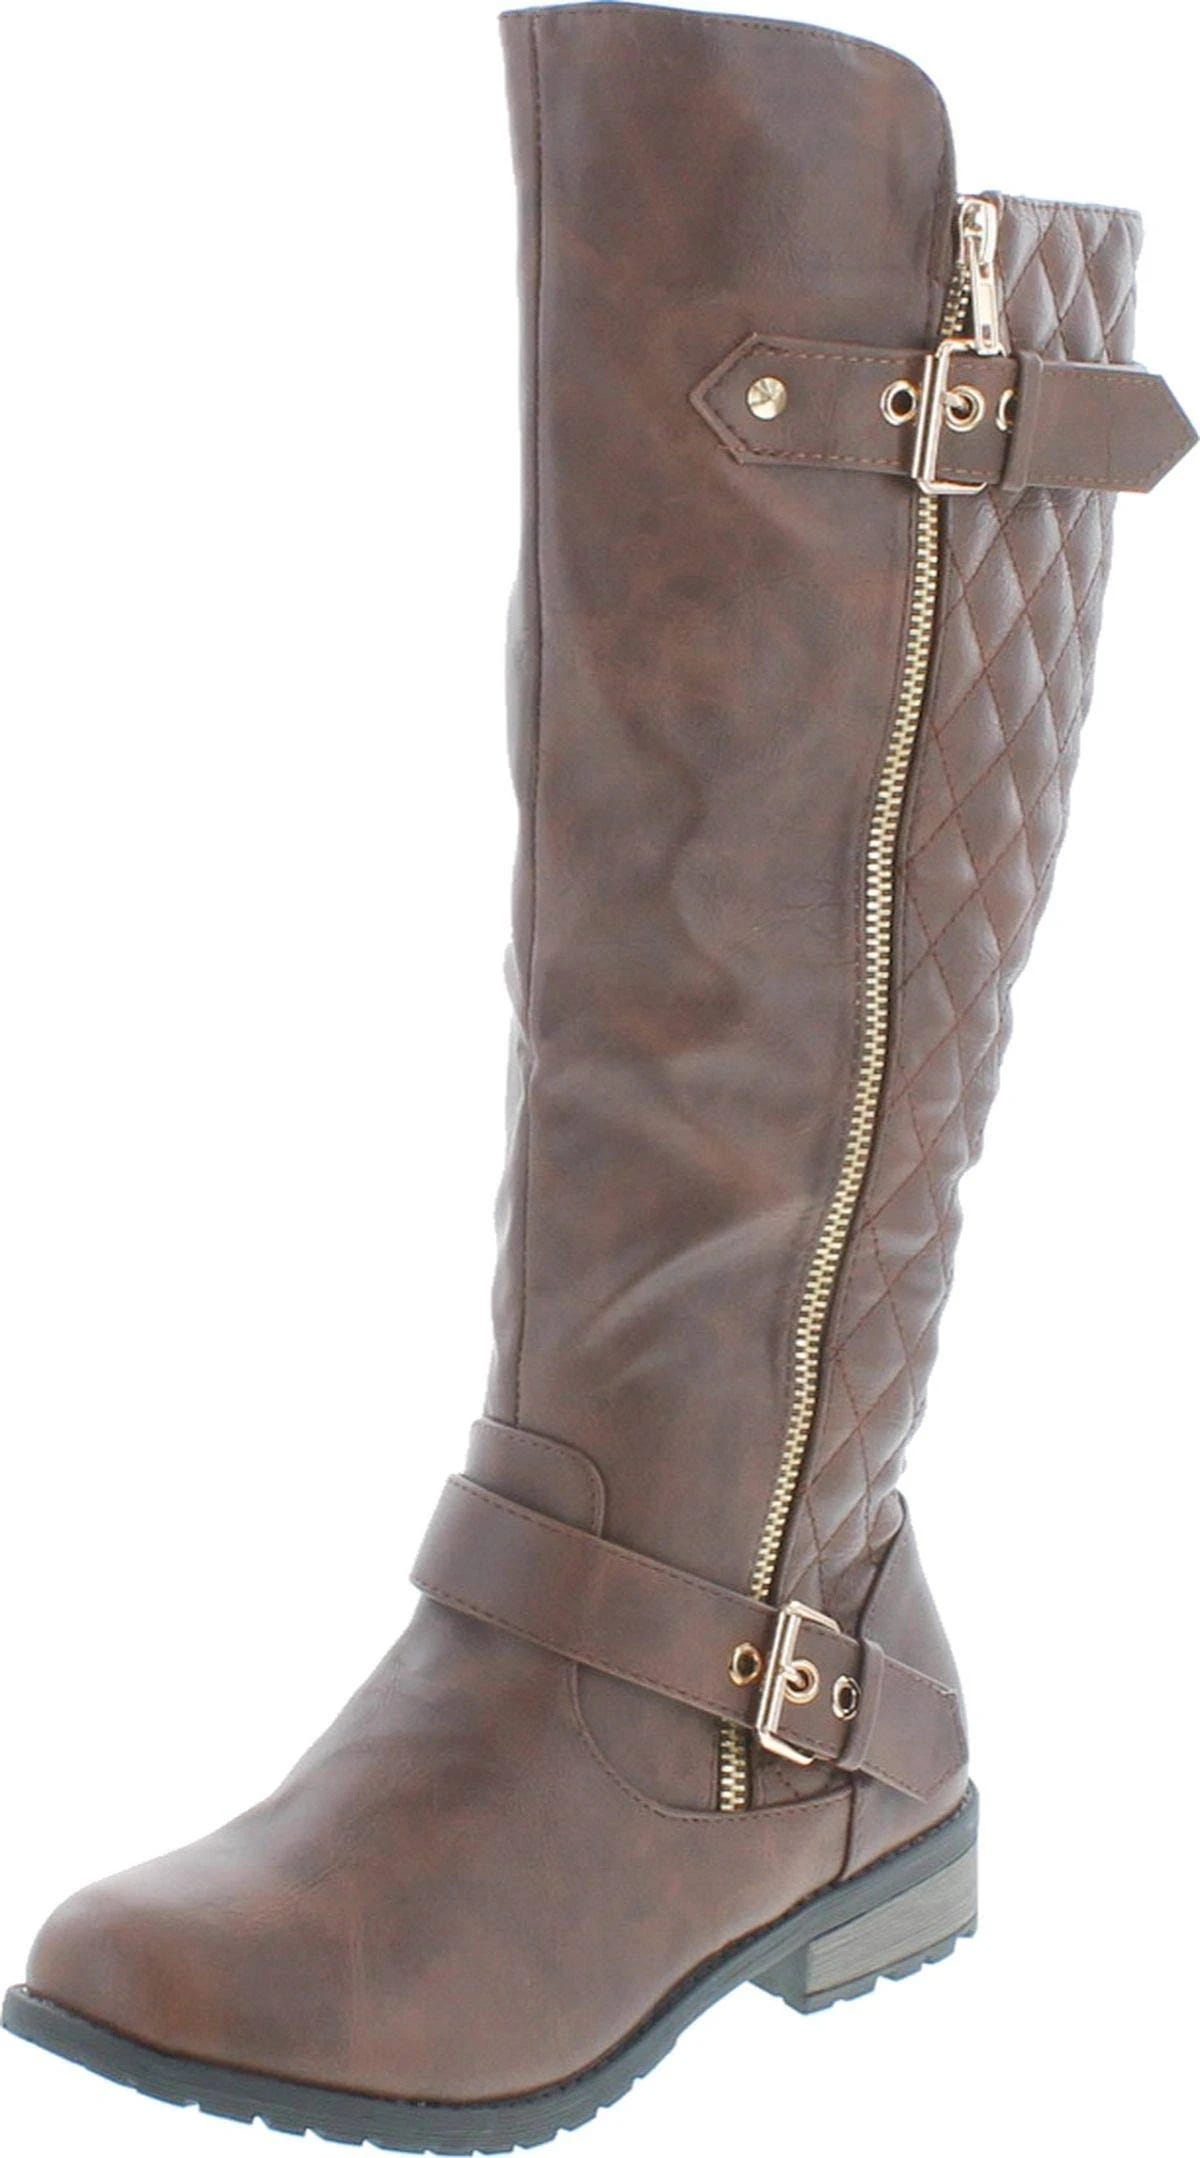 Comfortable Brown Riding Boots for Women with Flat Heel and Zip-Up Closure | Image